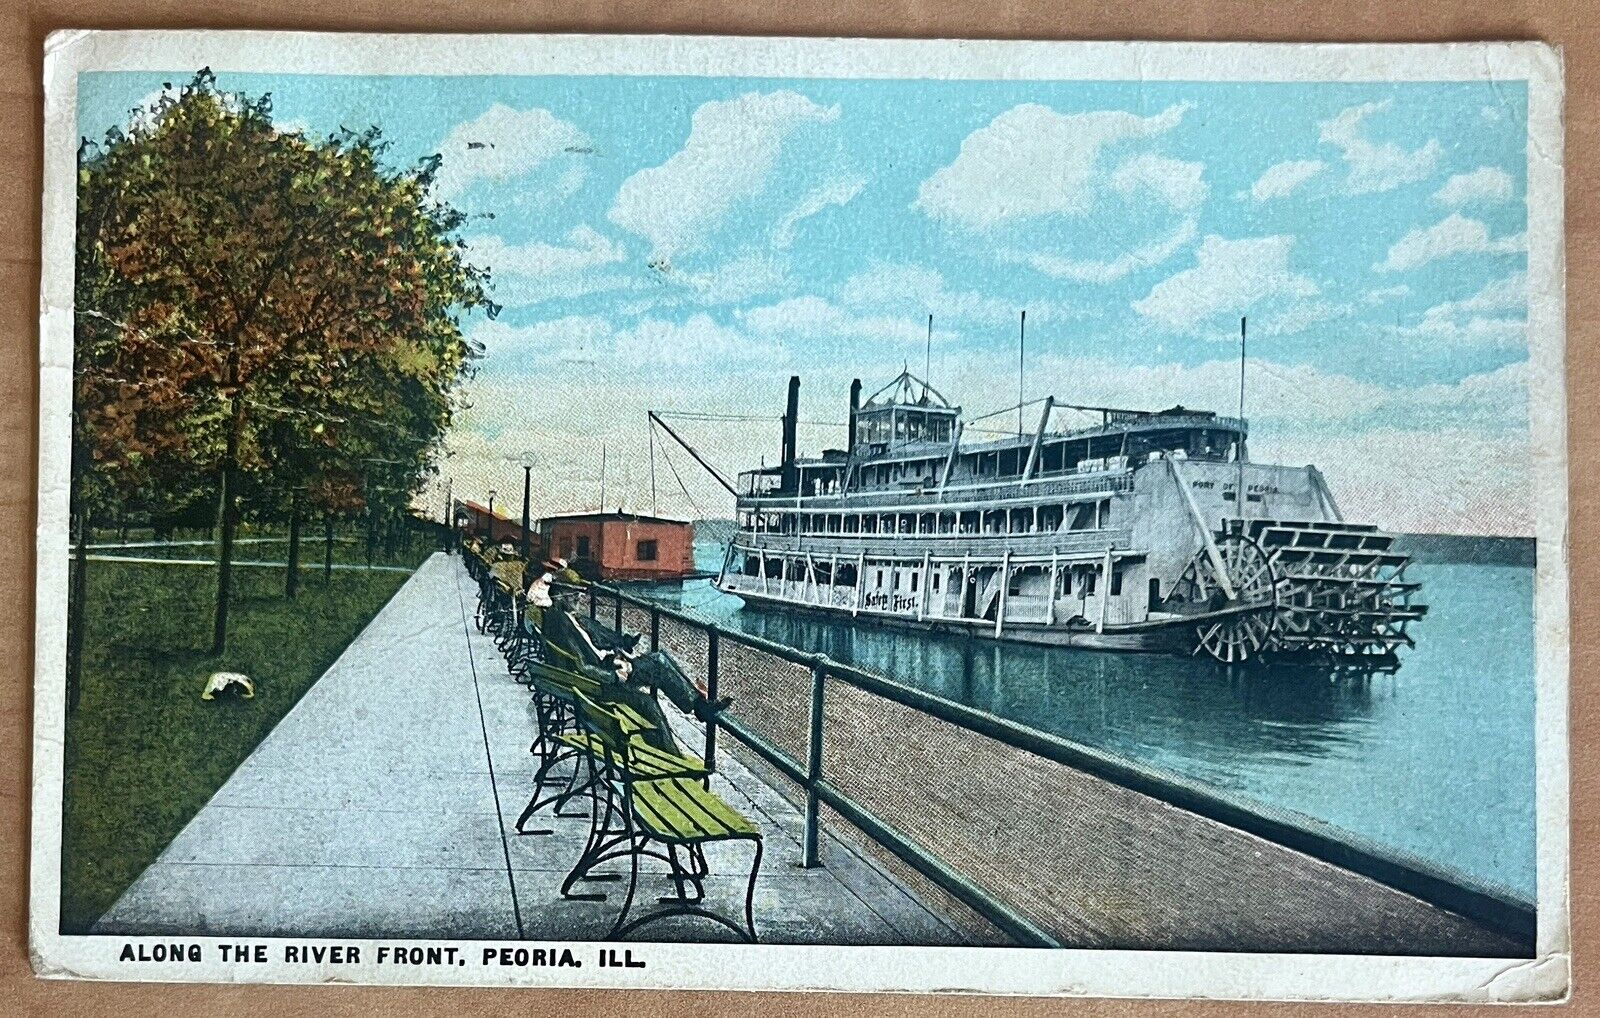 1926 Peoria Illinois Along the River Front POSTCARD Steamer Paddle Wheel Boat